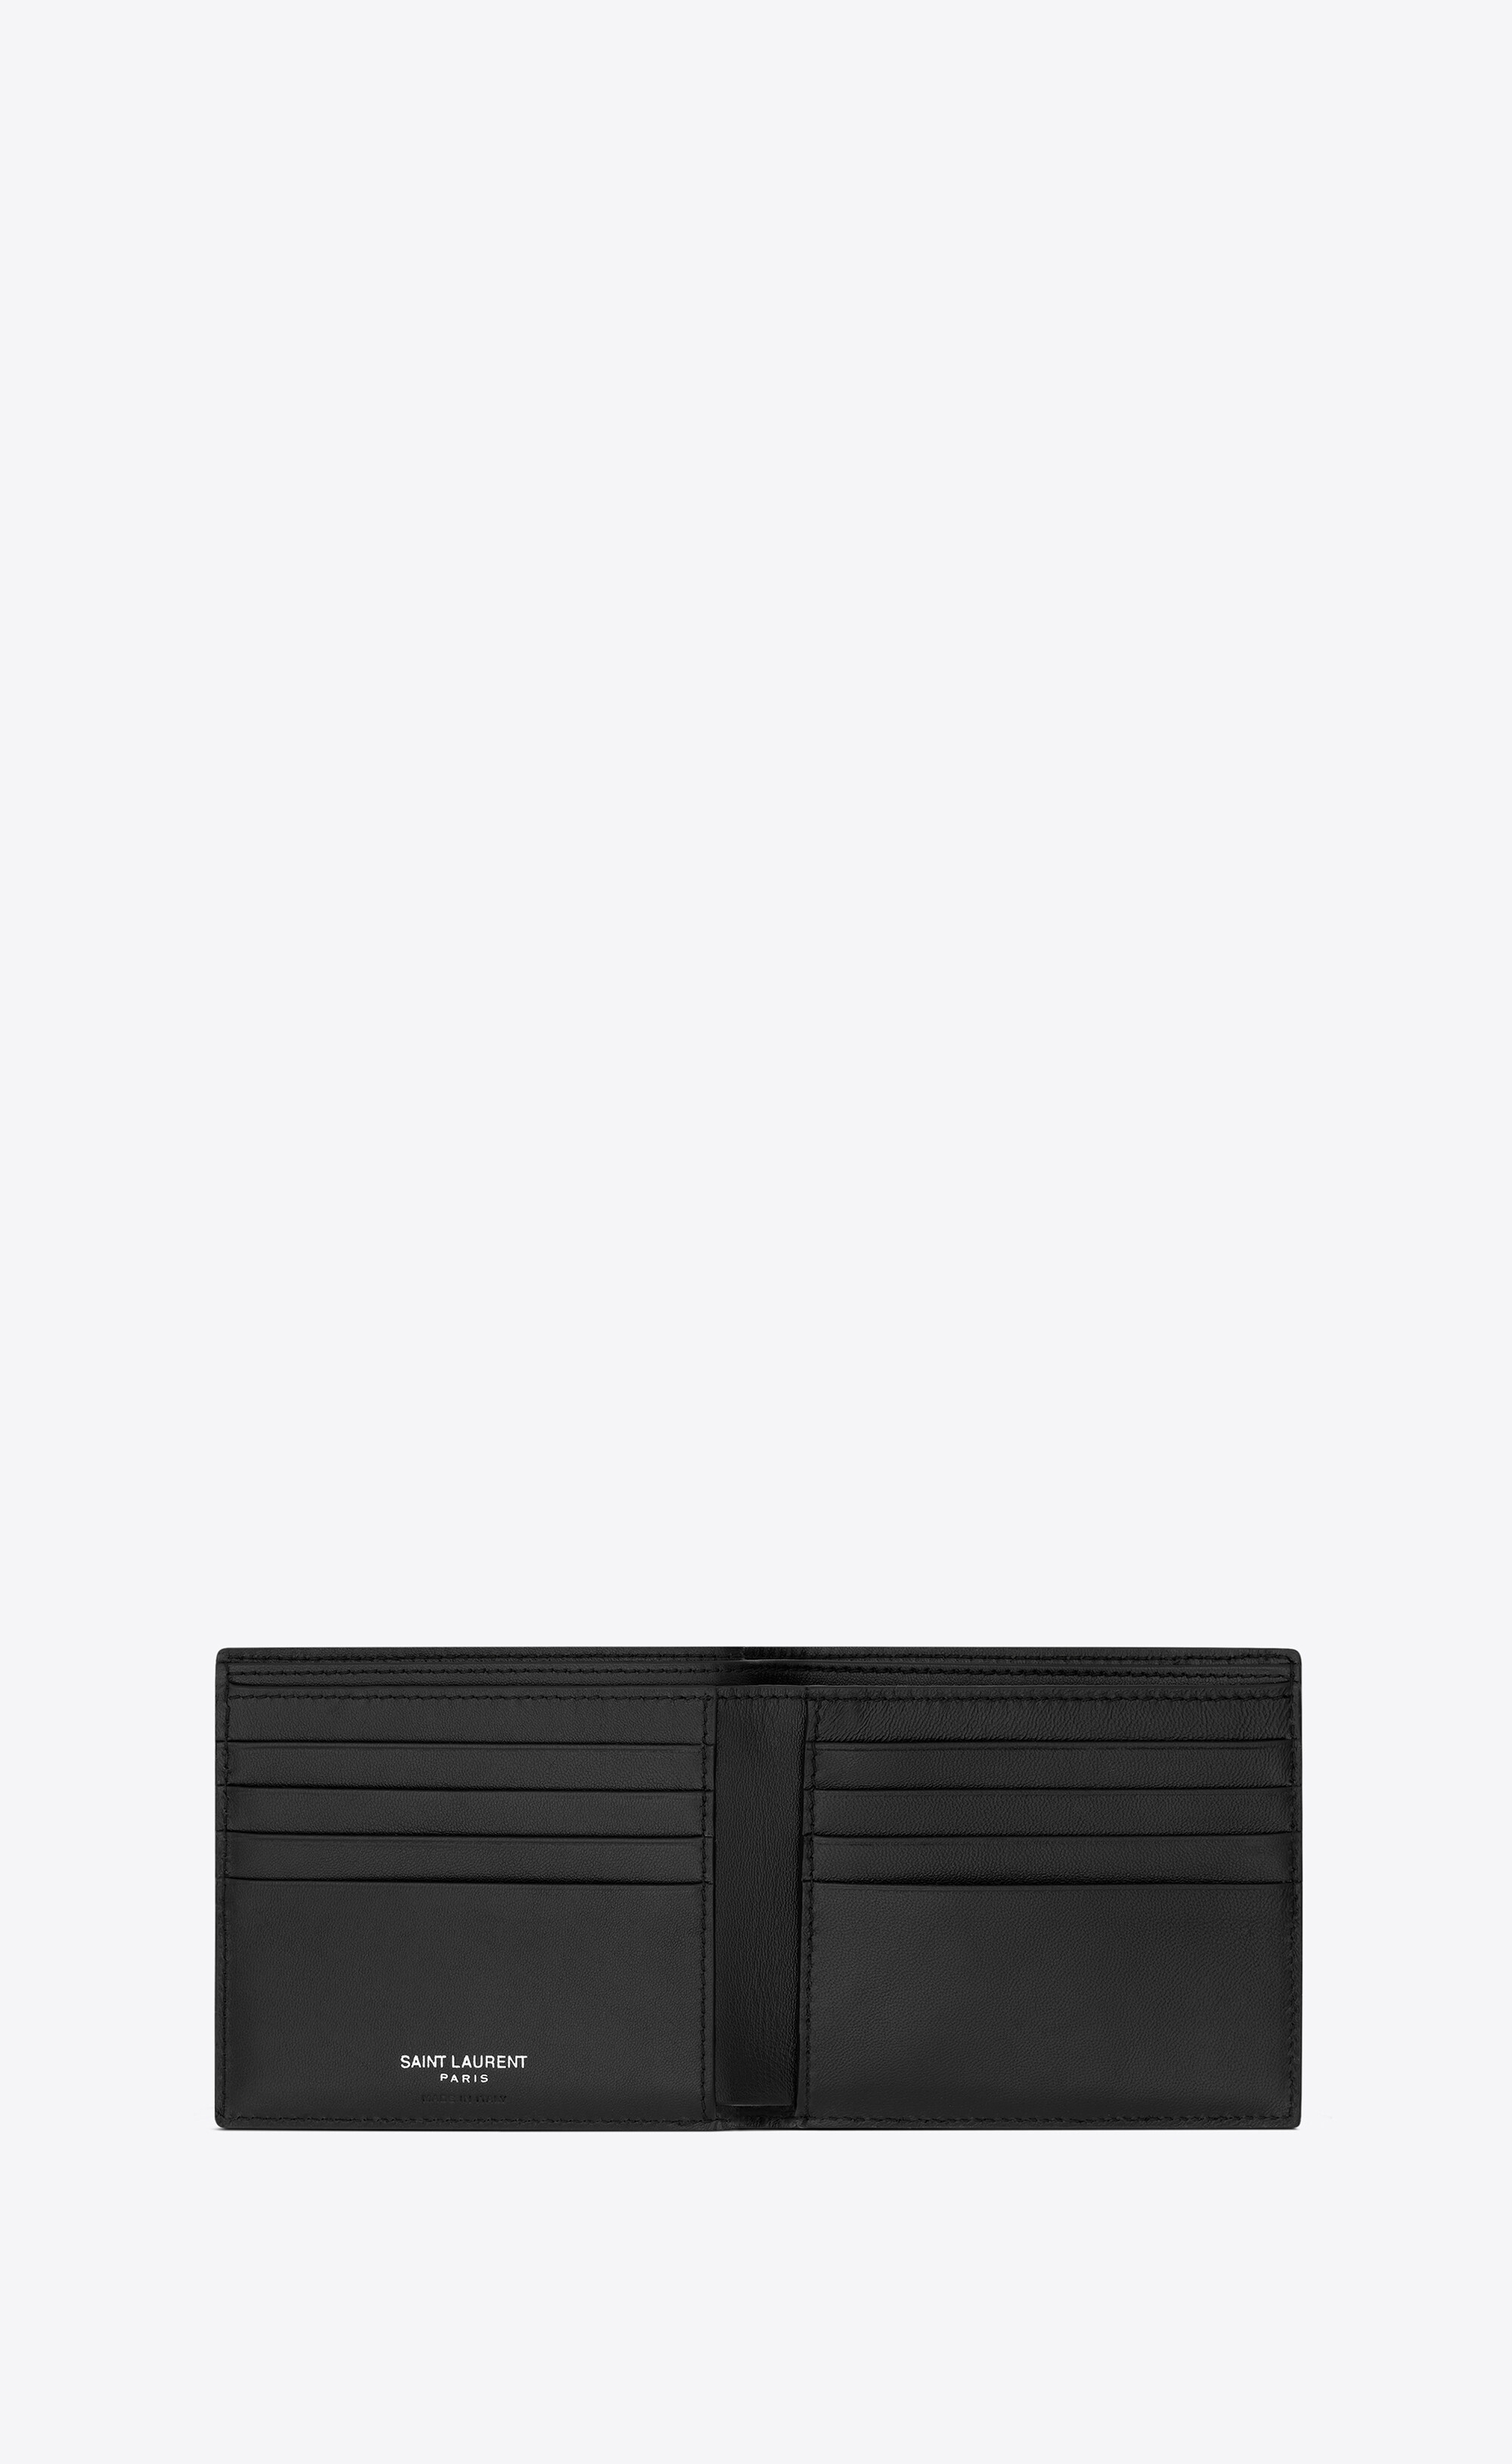 saint laurent east/west wallet in brushed leather - 4